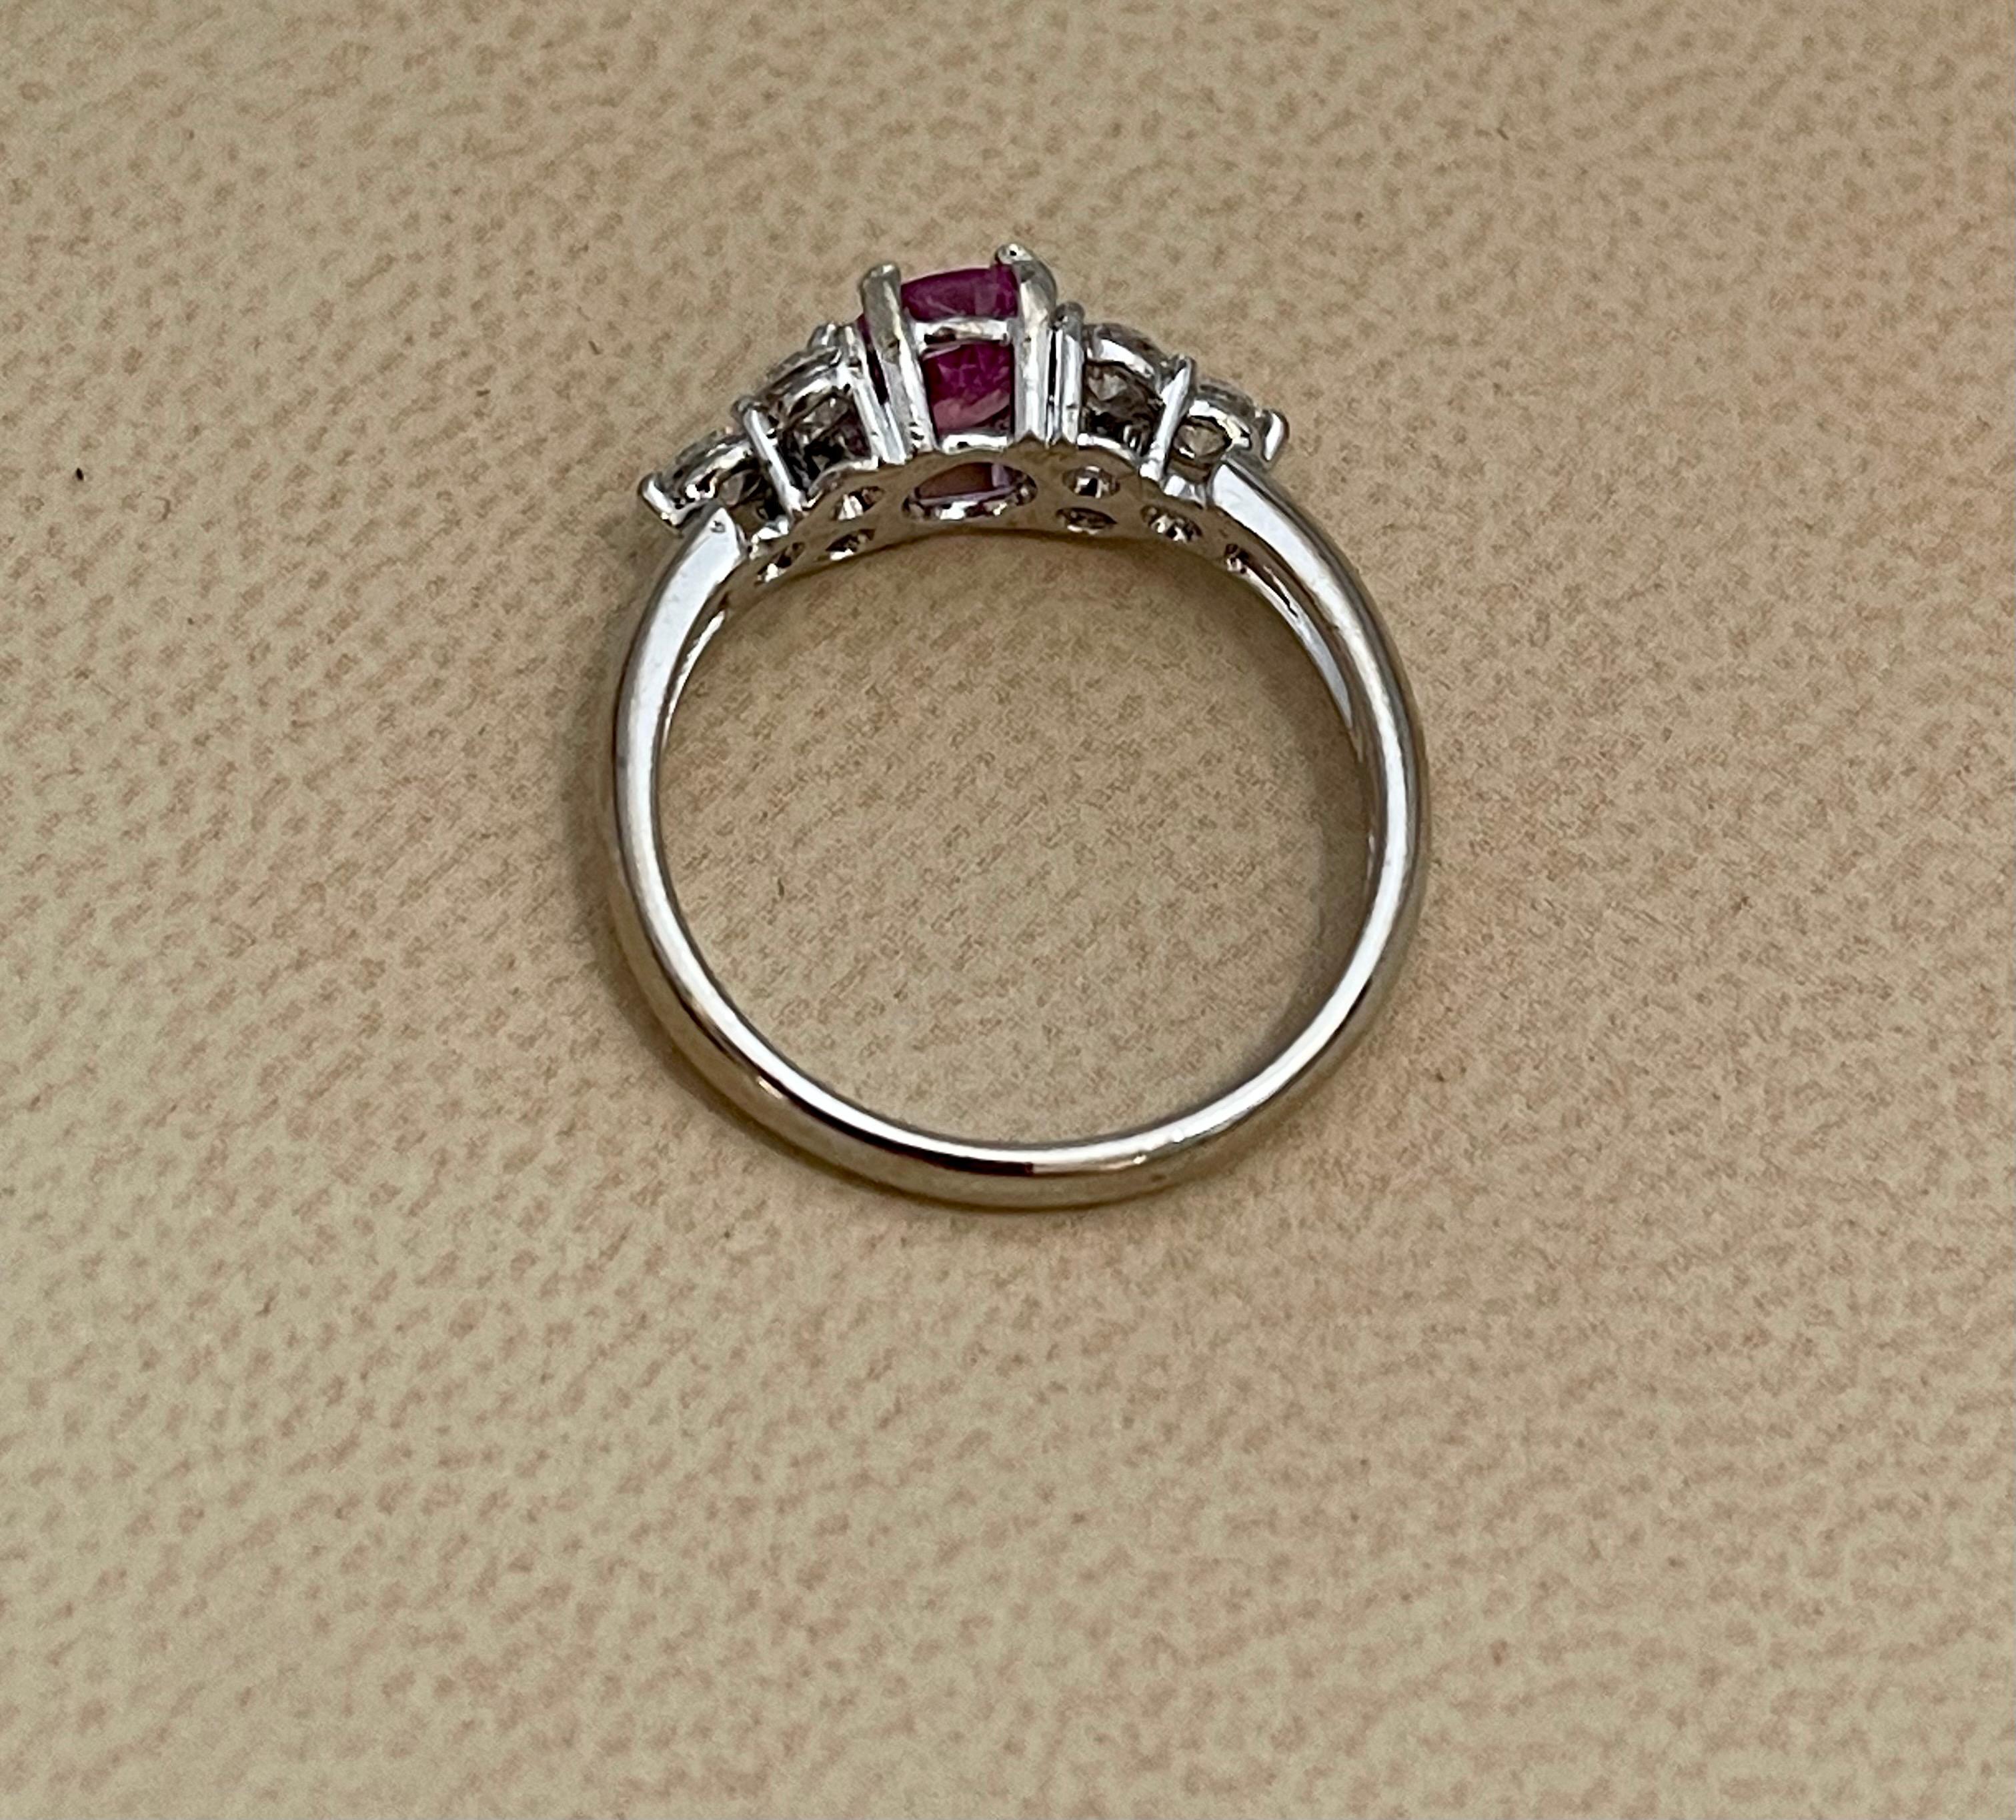 0.75 Ct Natural Pink Sapphire & 0.50 Ct Diamond Ring in 18 Karat White Gold For Sale 4